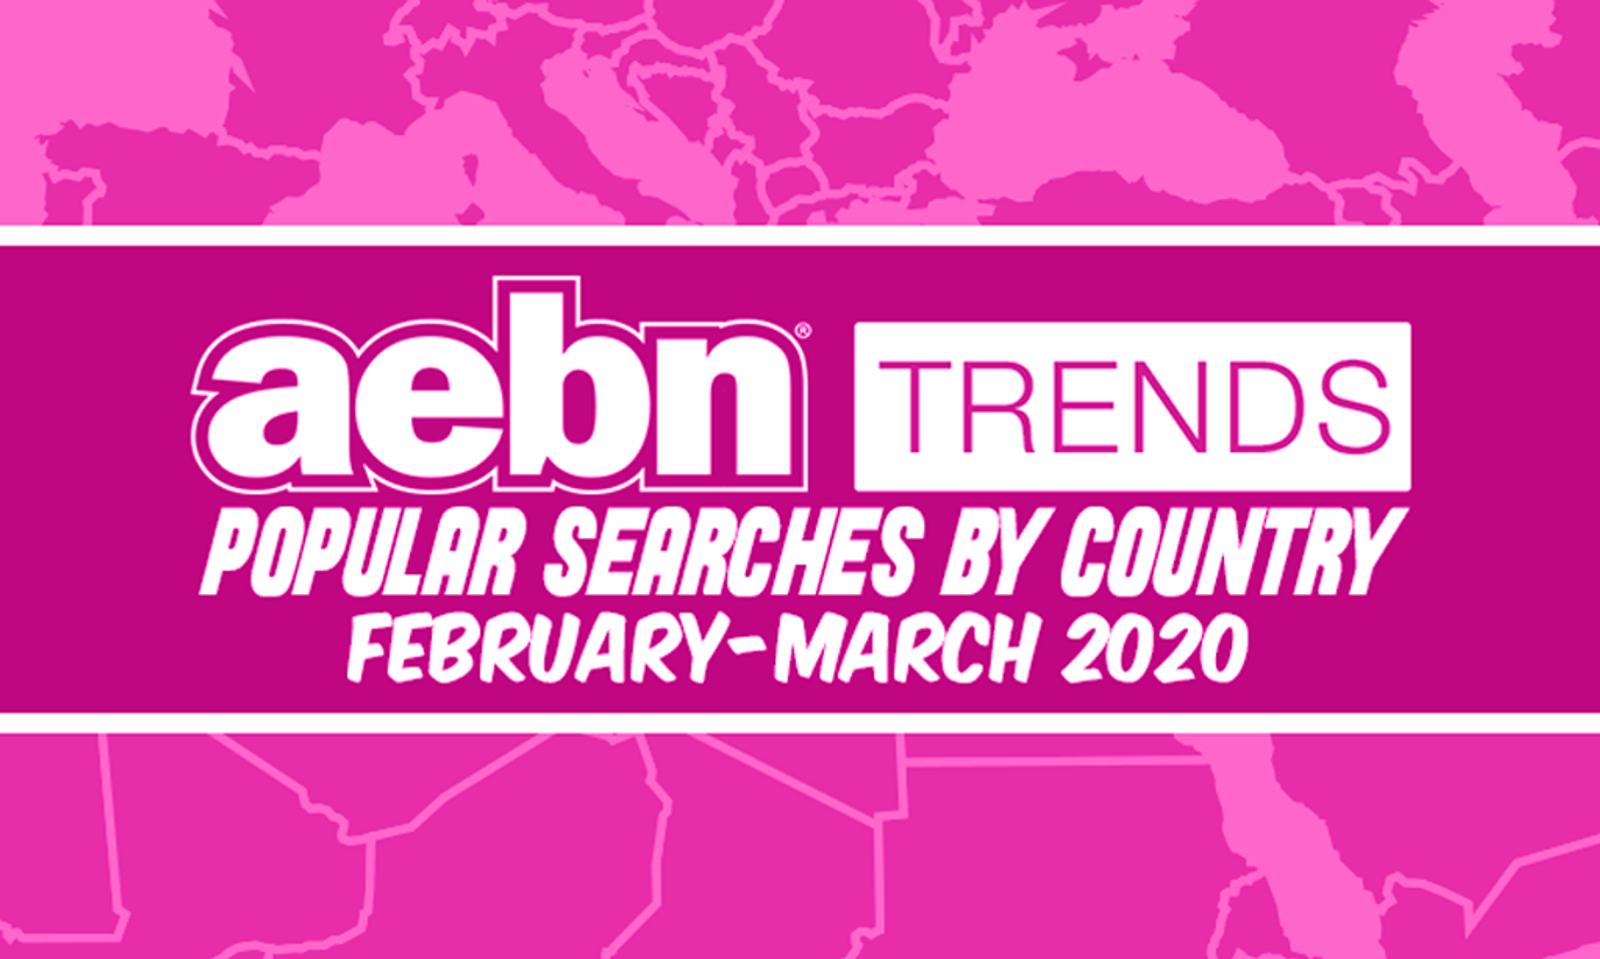 Ava Addams, Dredd Are Among Most Searched Topics in AEBN Study